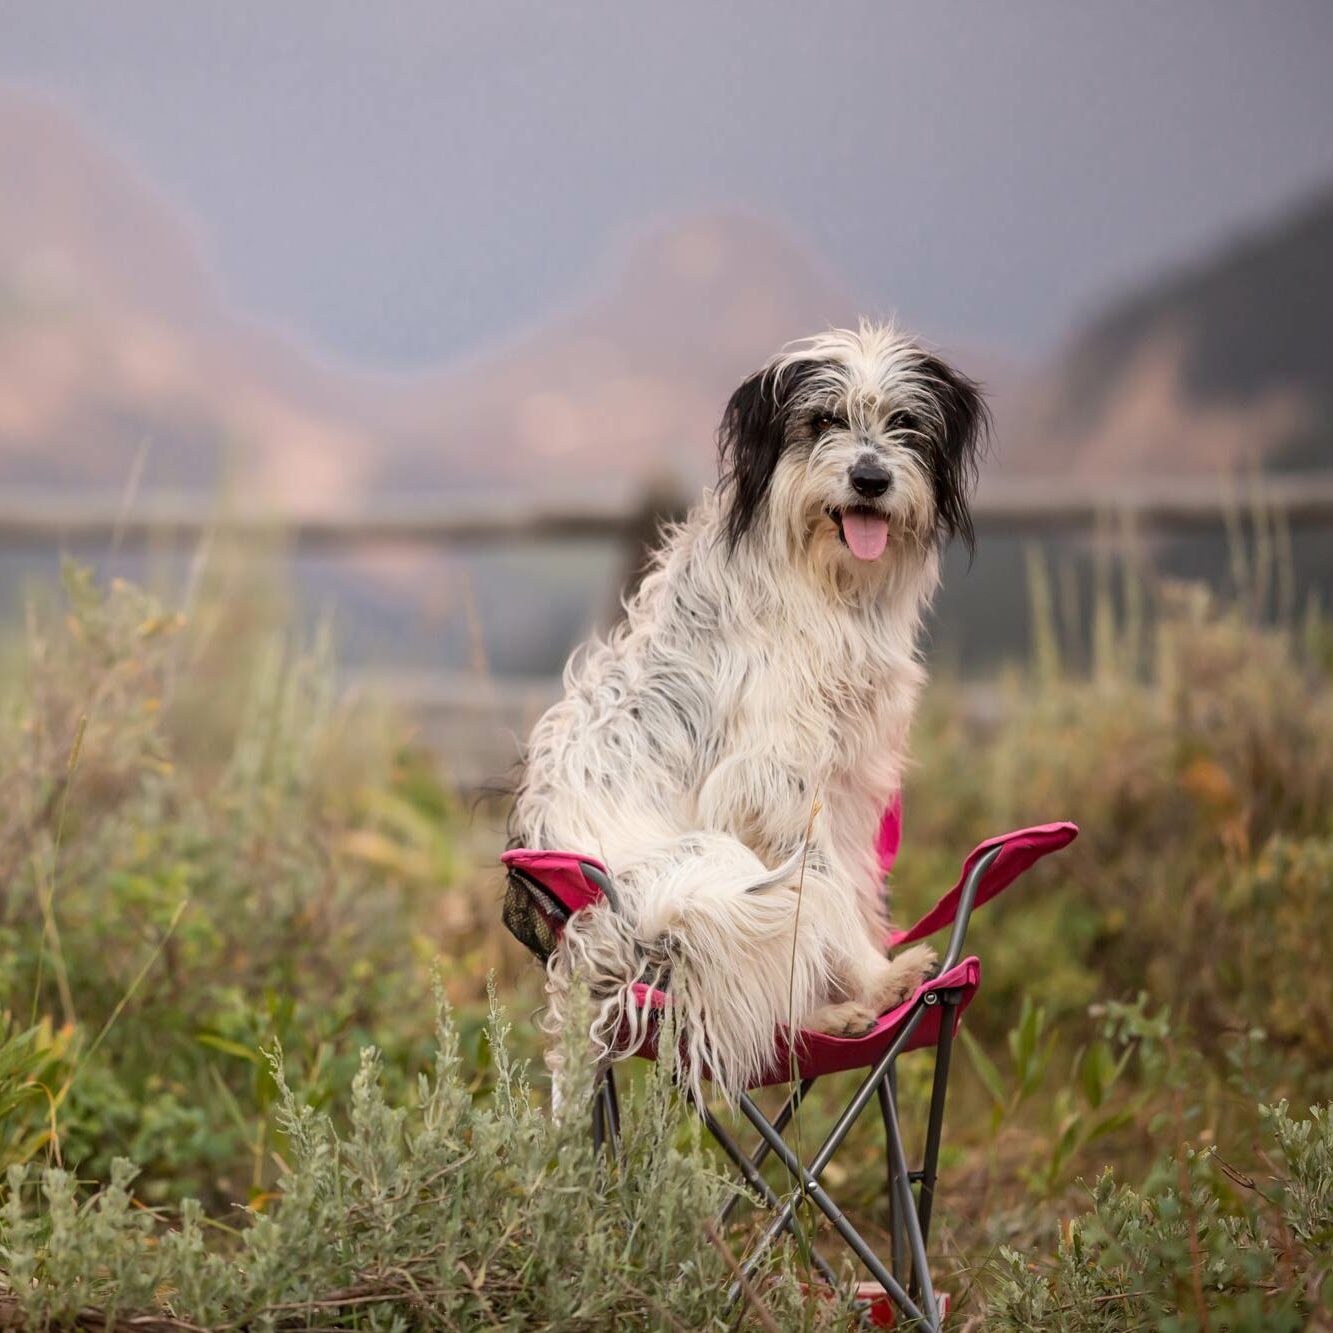 Dog sitting on a fold out camping chair in a field of brush grass